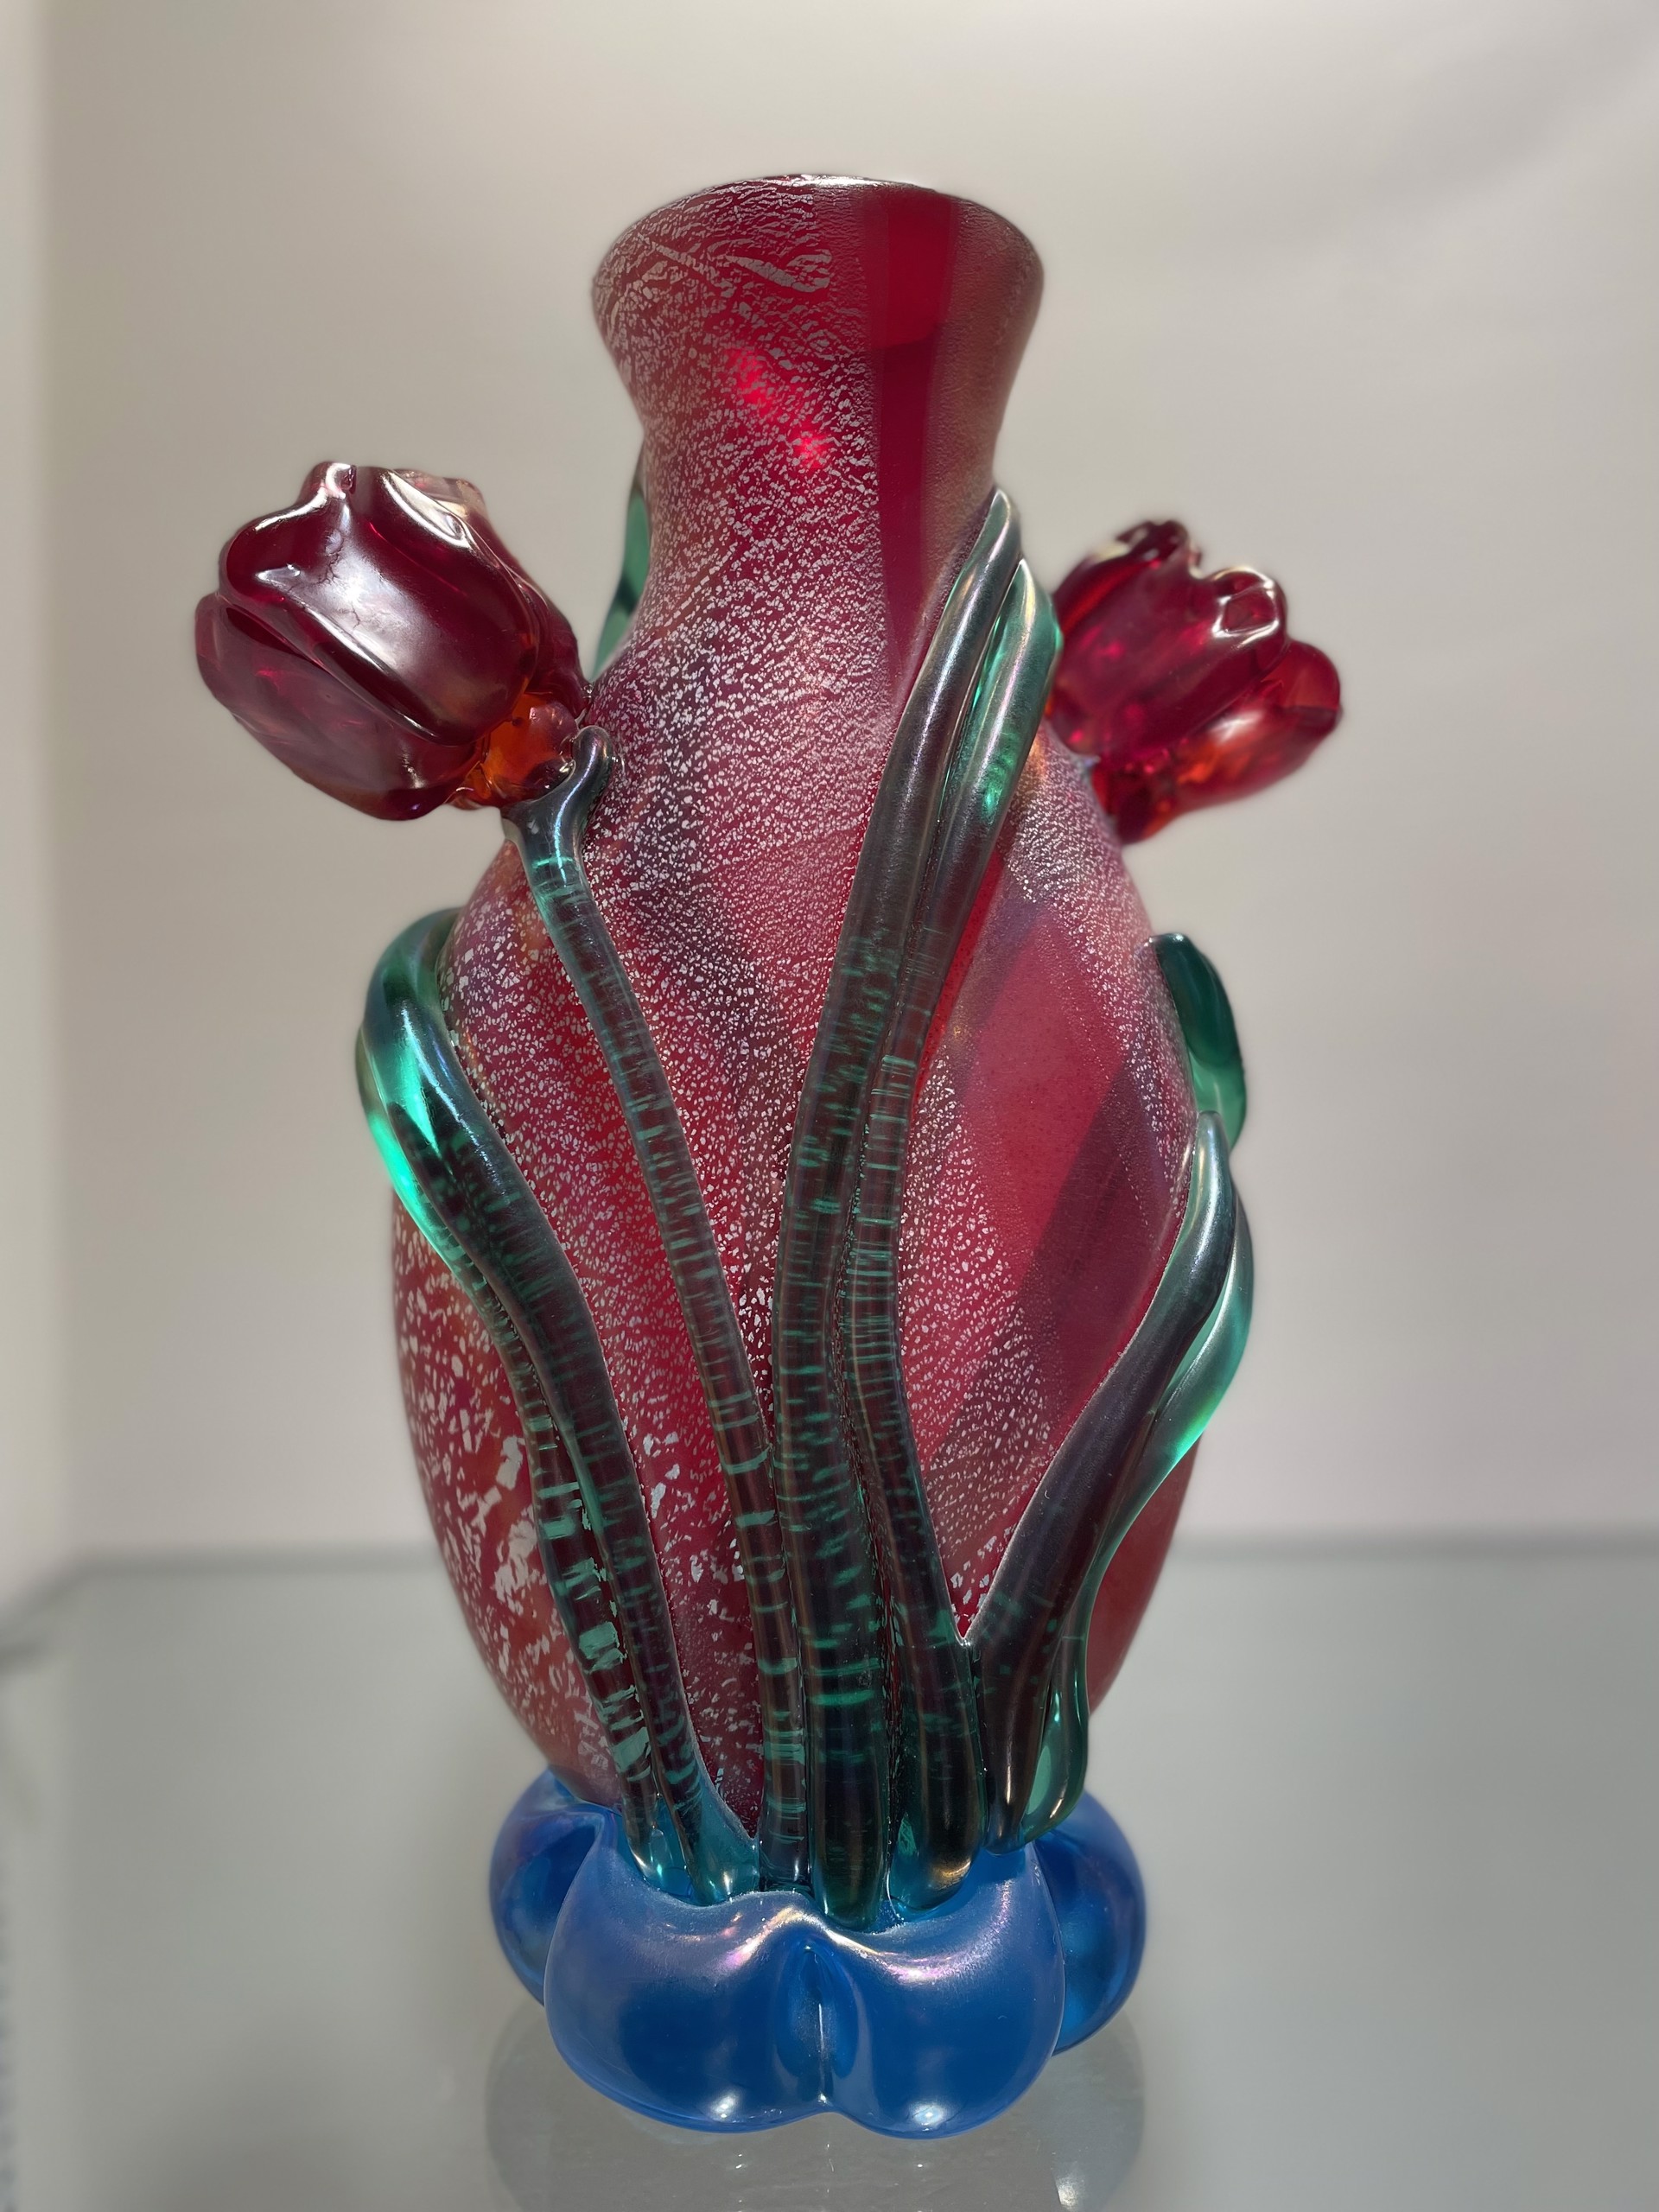 Red Iridescent Tulip Vase by Tommie Rush